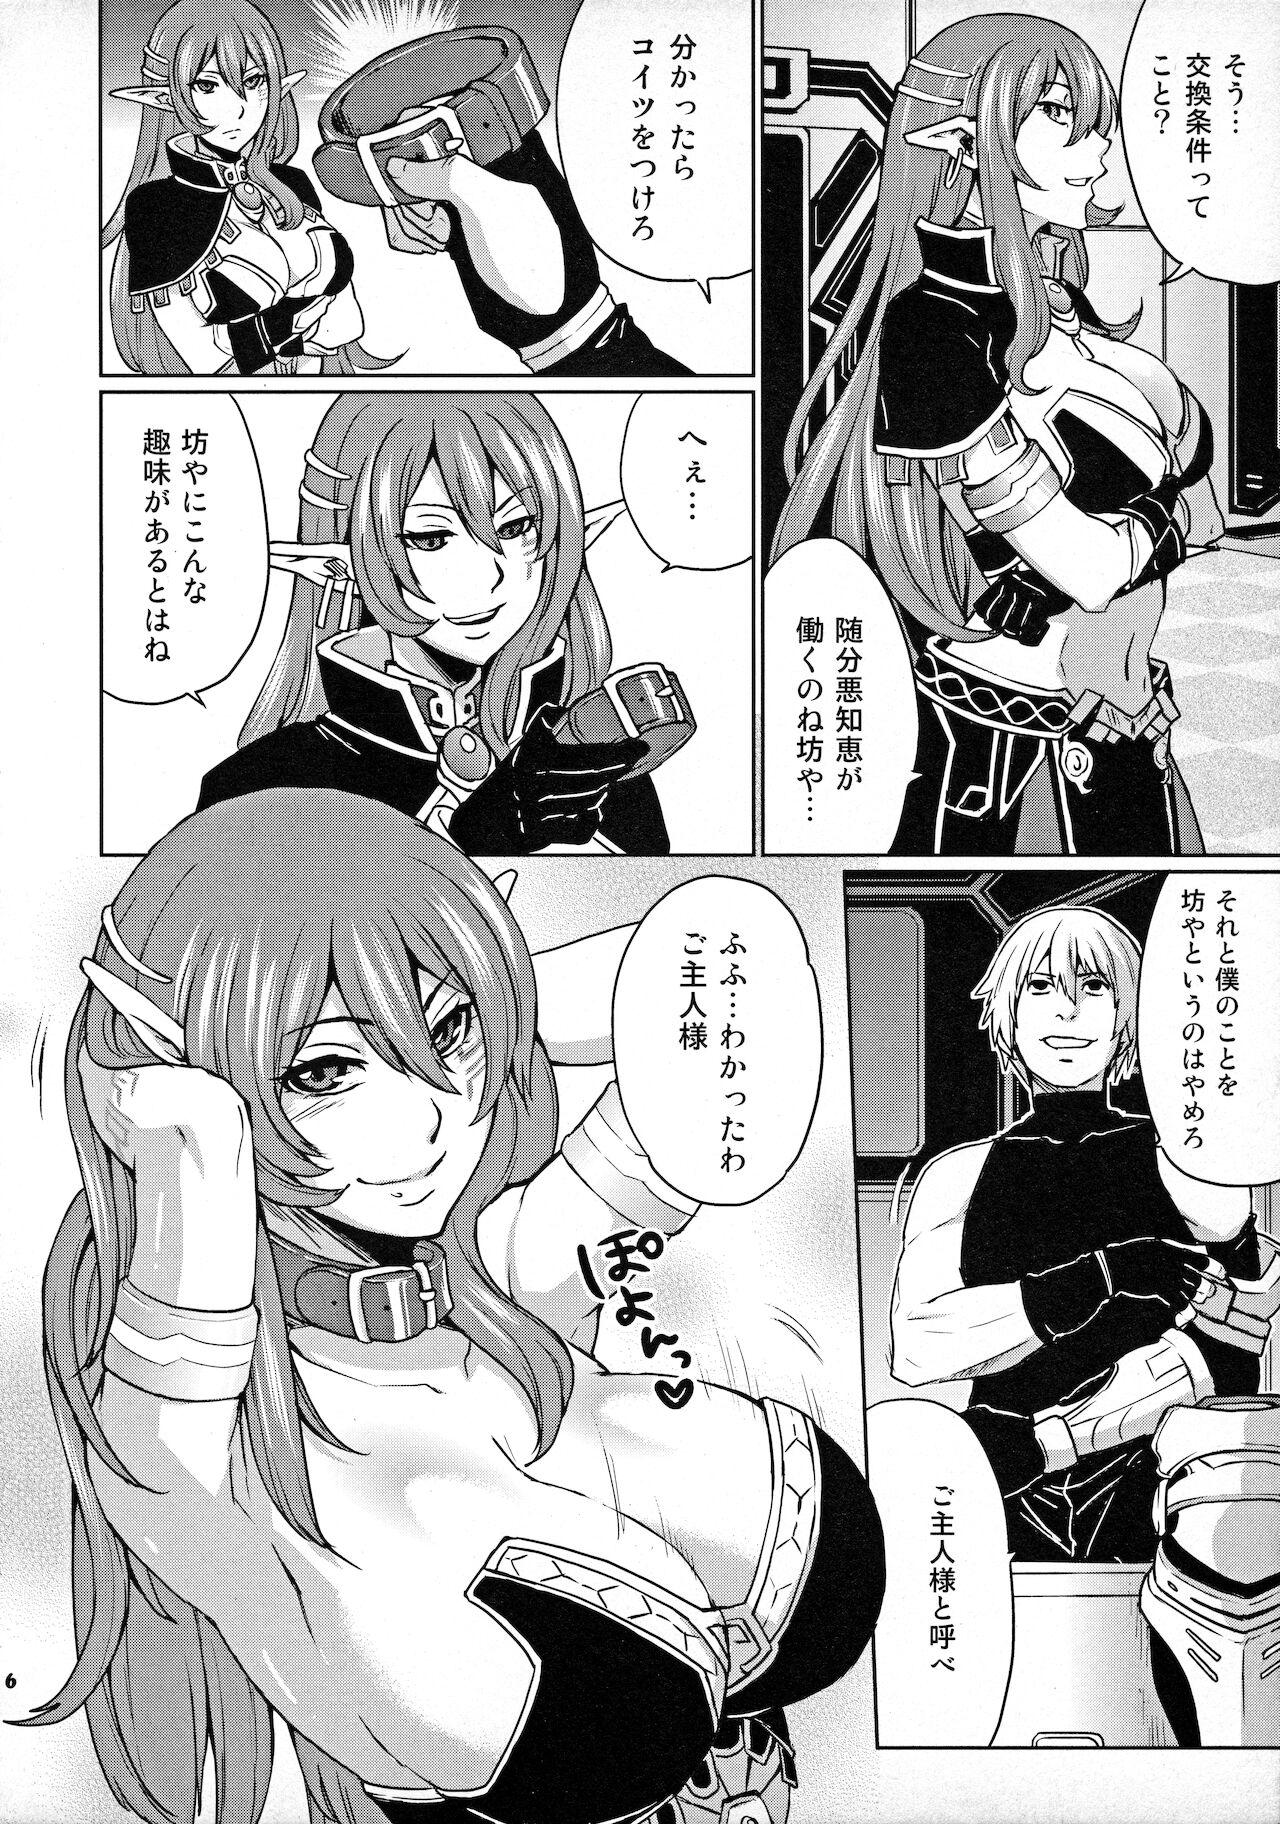 Woman Fucking Hoshi no Umi no Miboujin - The Widow of The Star Ocean - Star ocean 4 Eating Pussy - Page 5